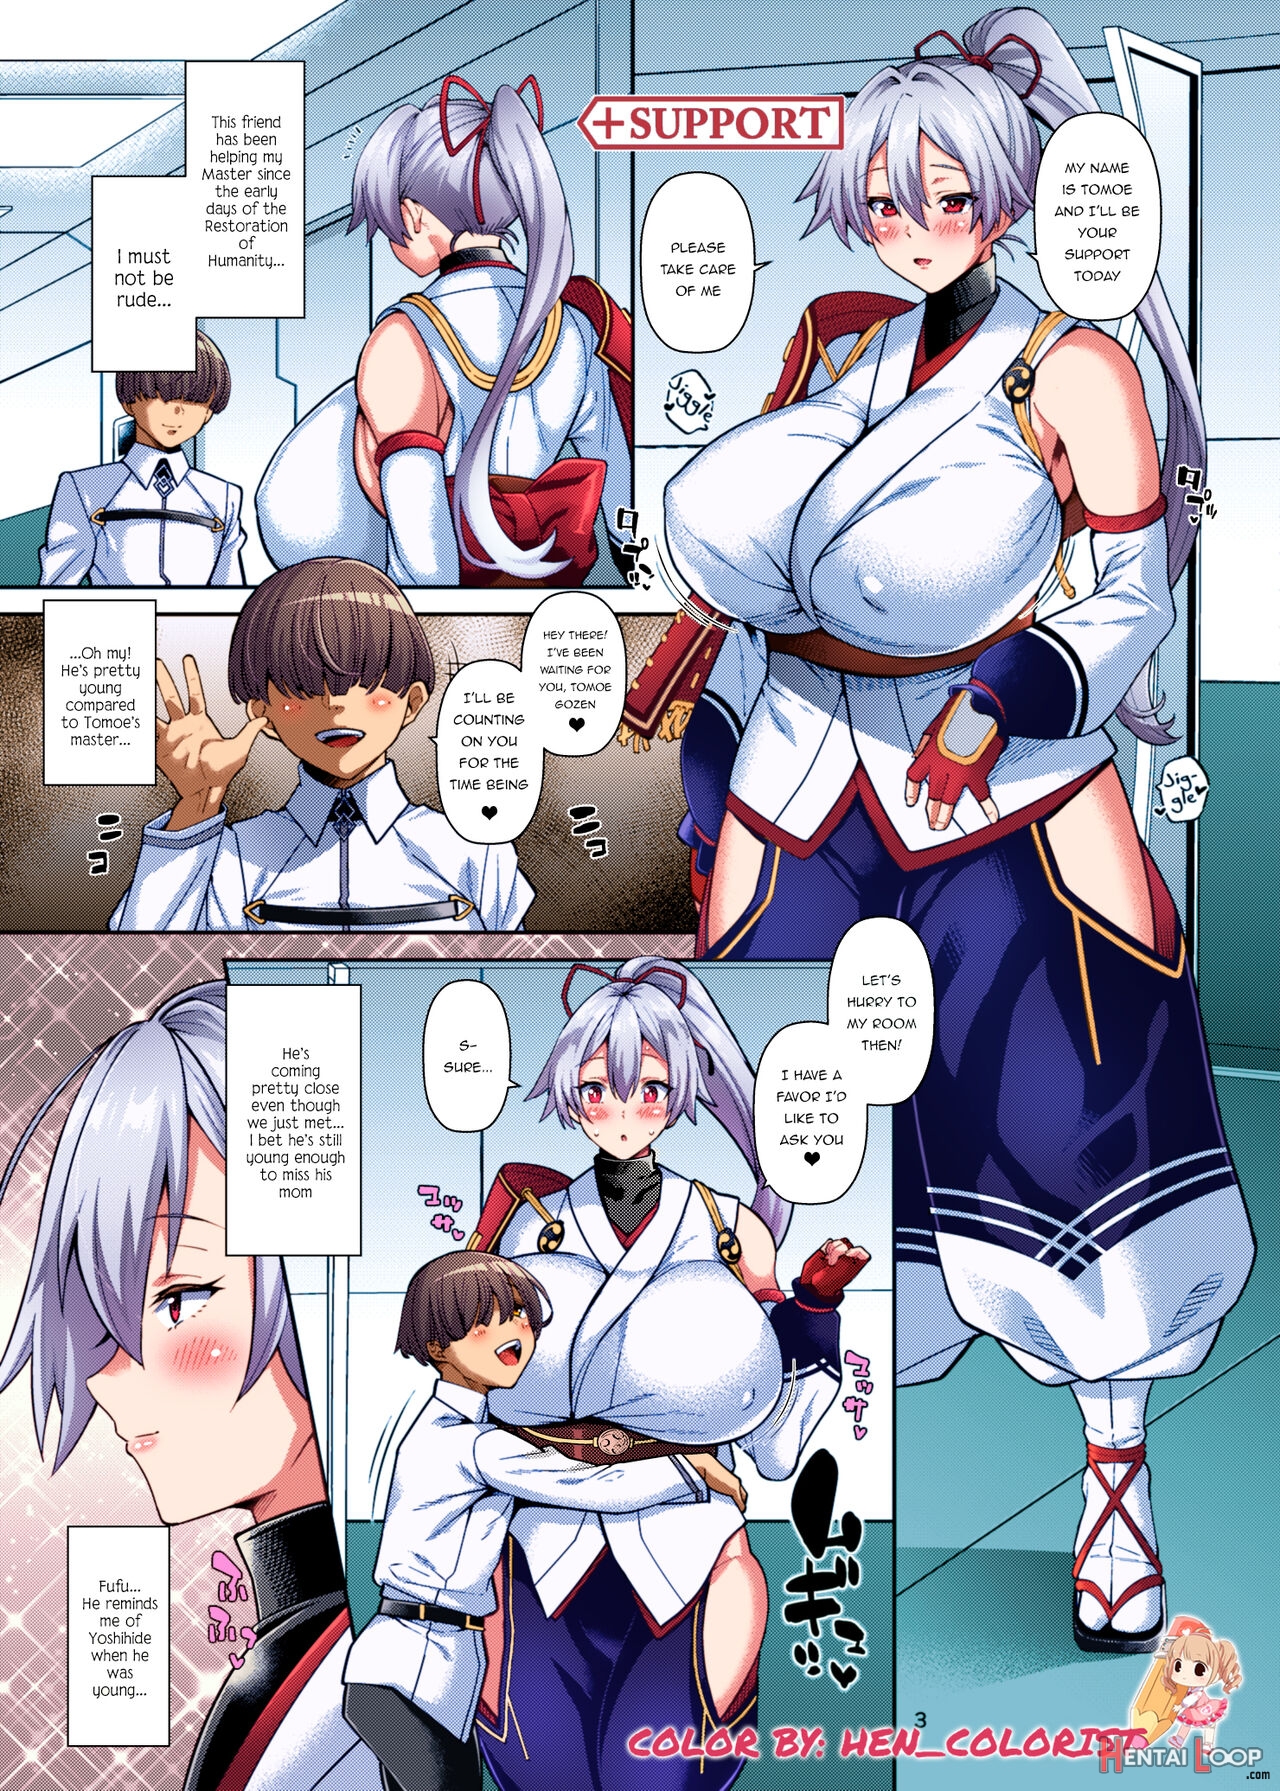 Sex Support Zupposhi Gozen – Colorized page 2